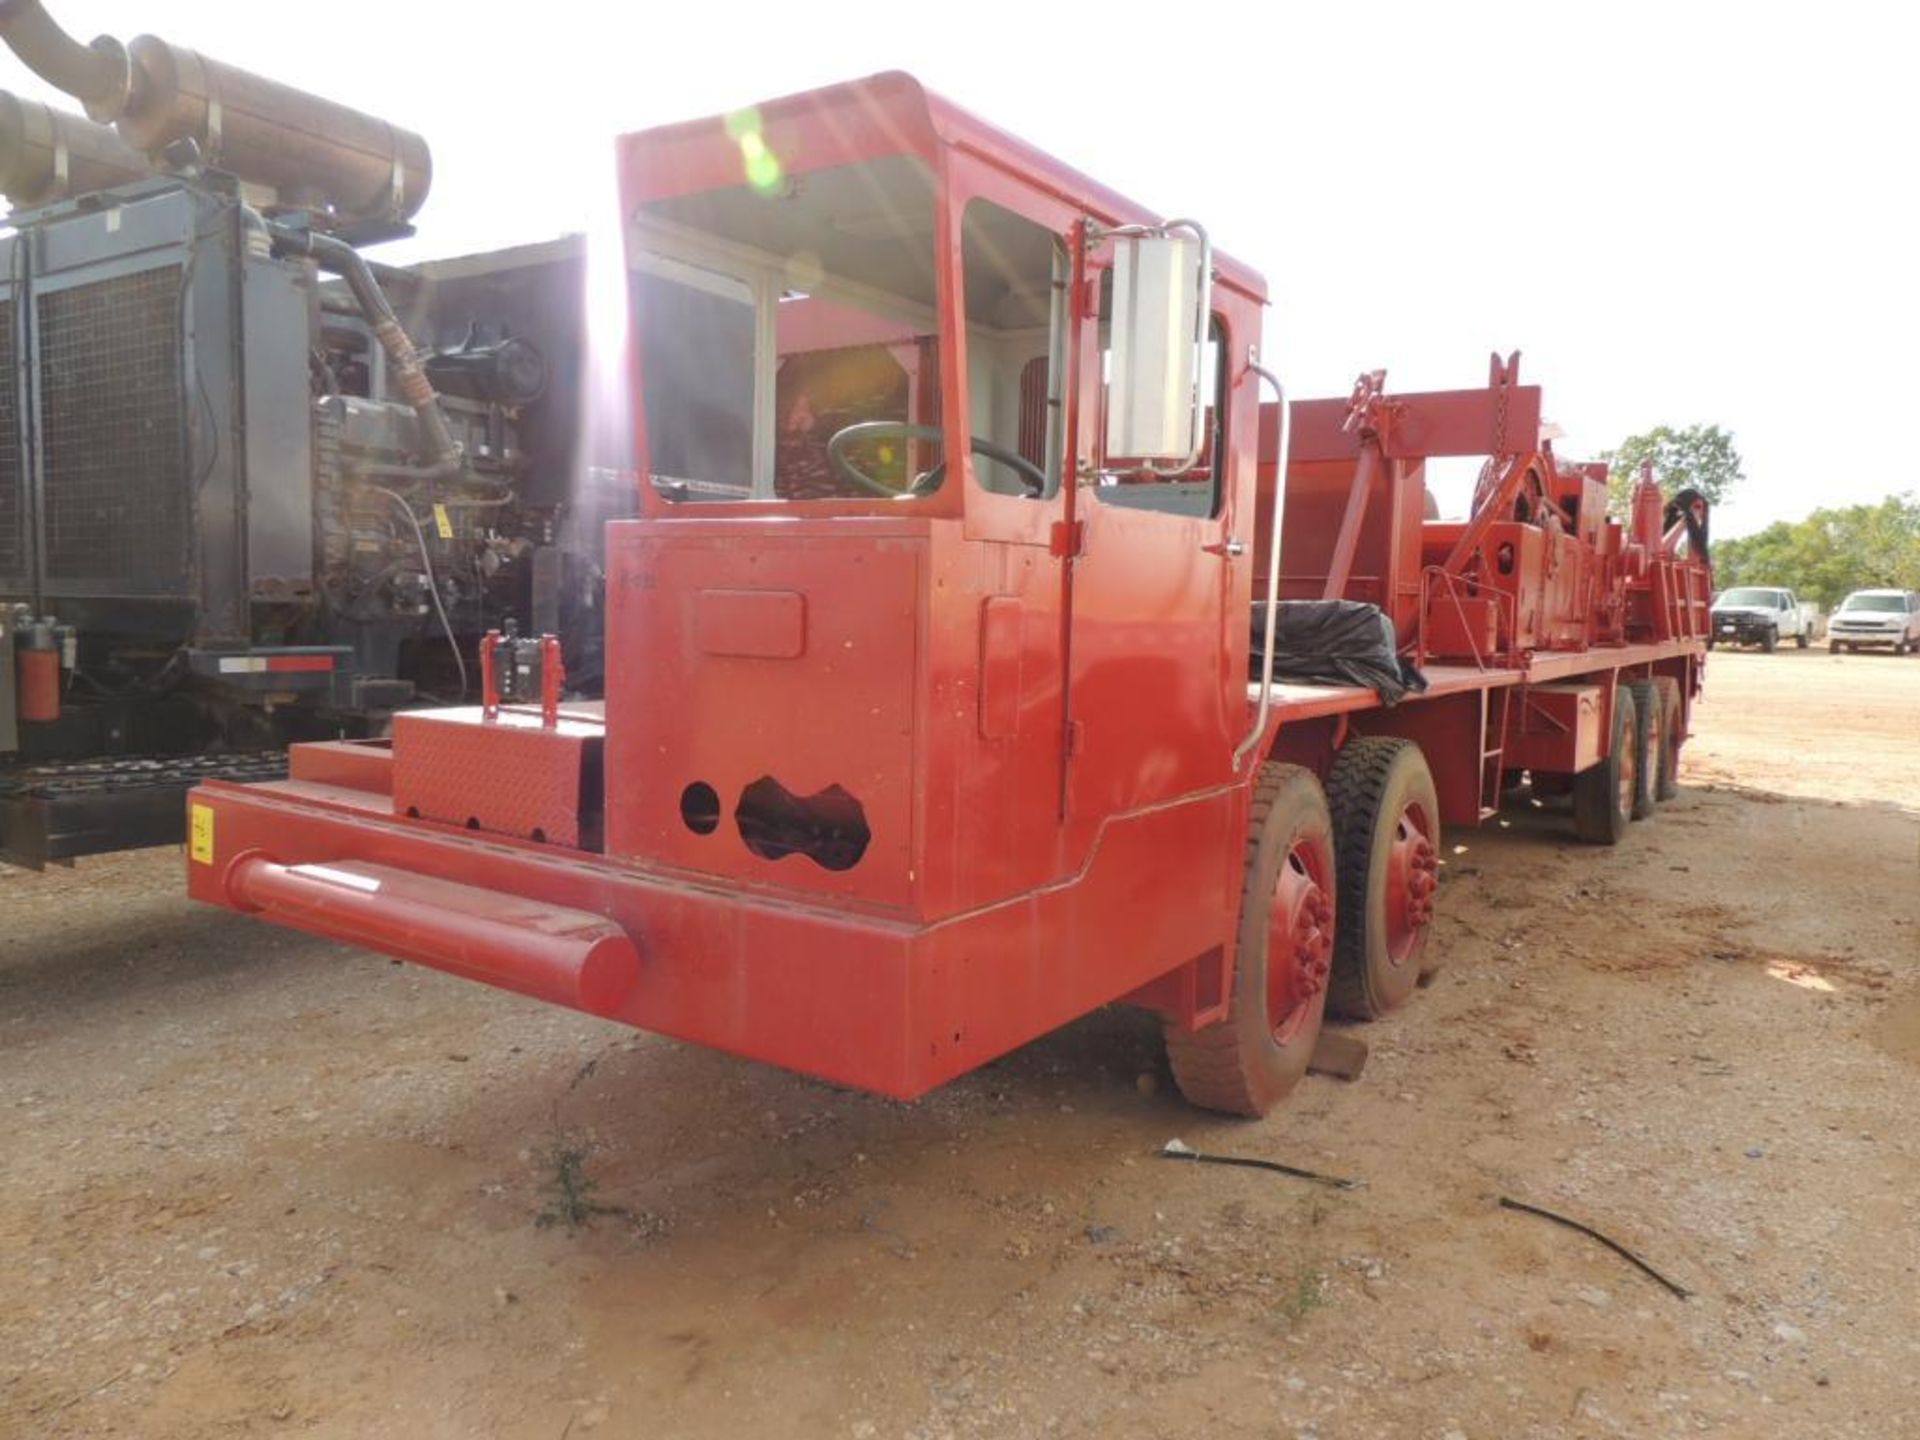 1981 Franks 1287-160 Well Service Rig, 5 Axle, Detroit Series 60, 5860 Transmission, ( Not Running /